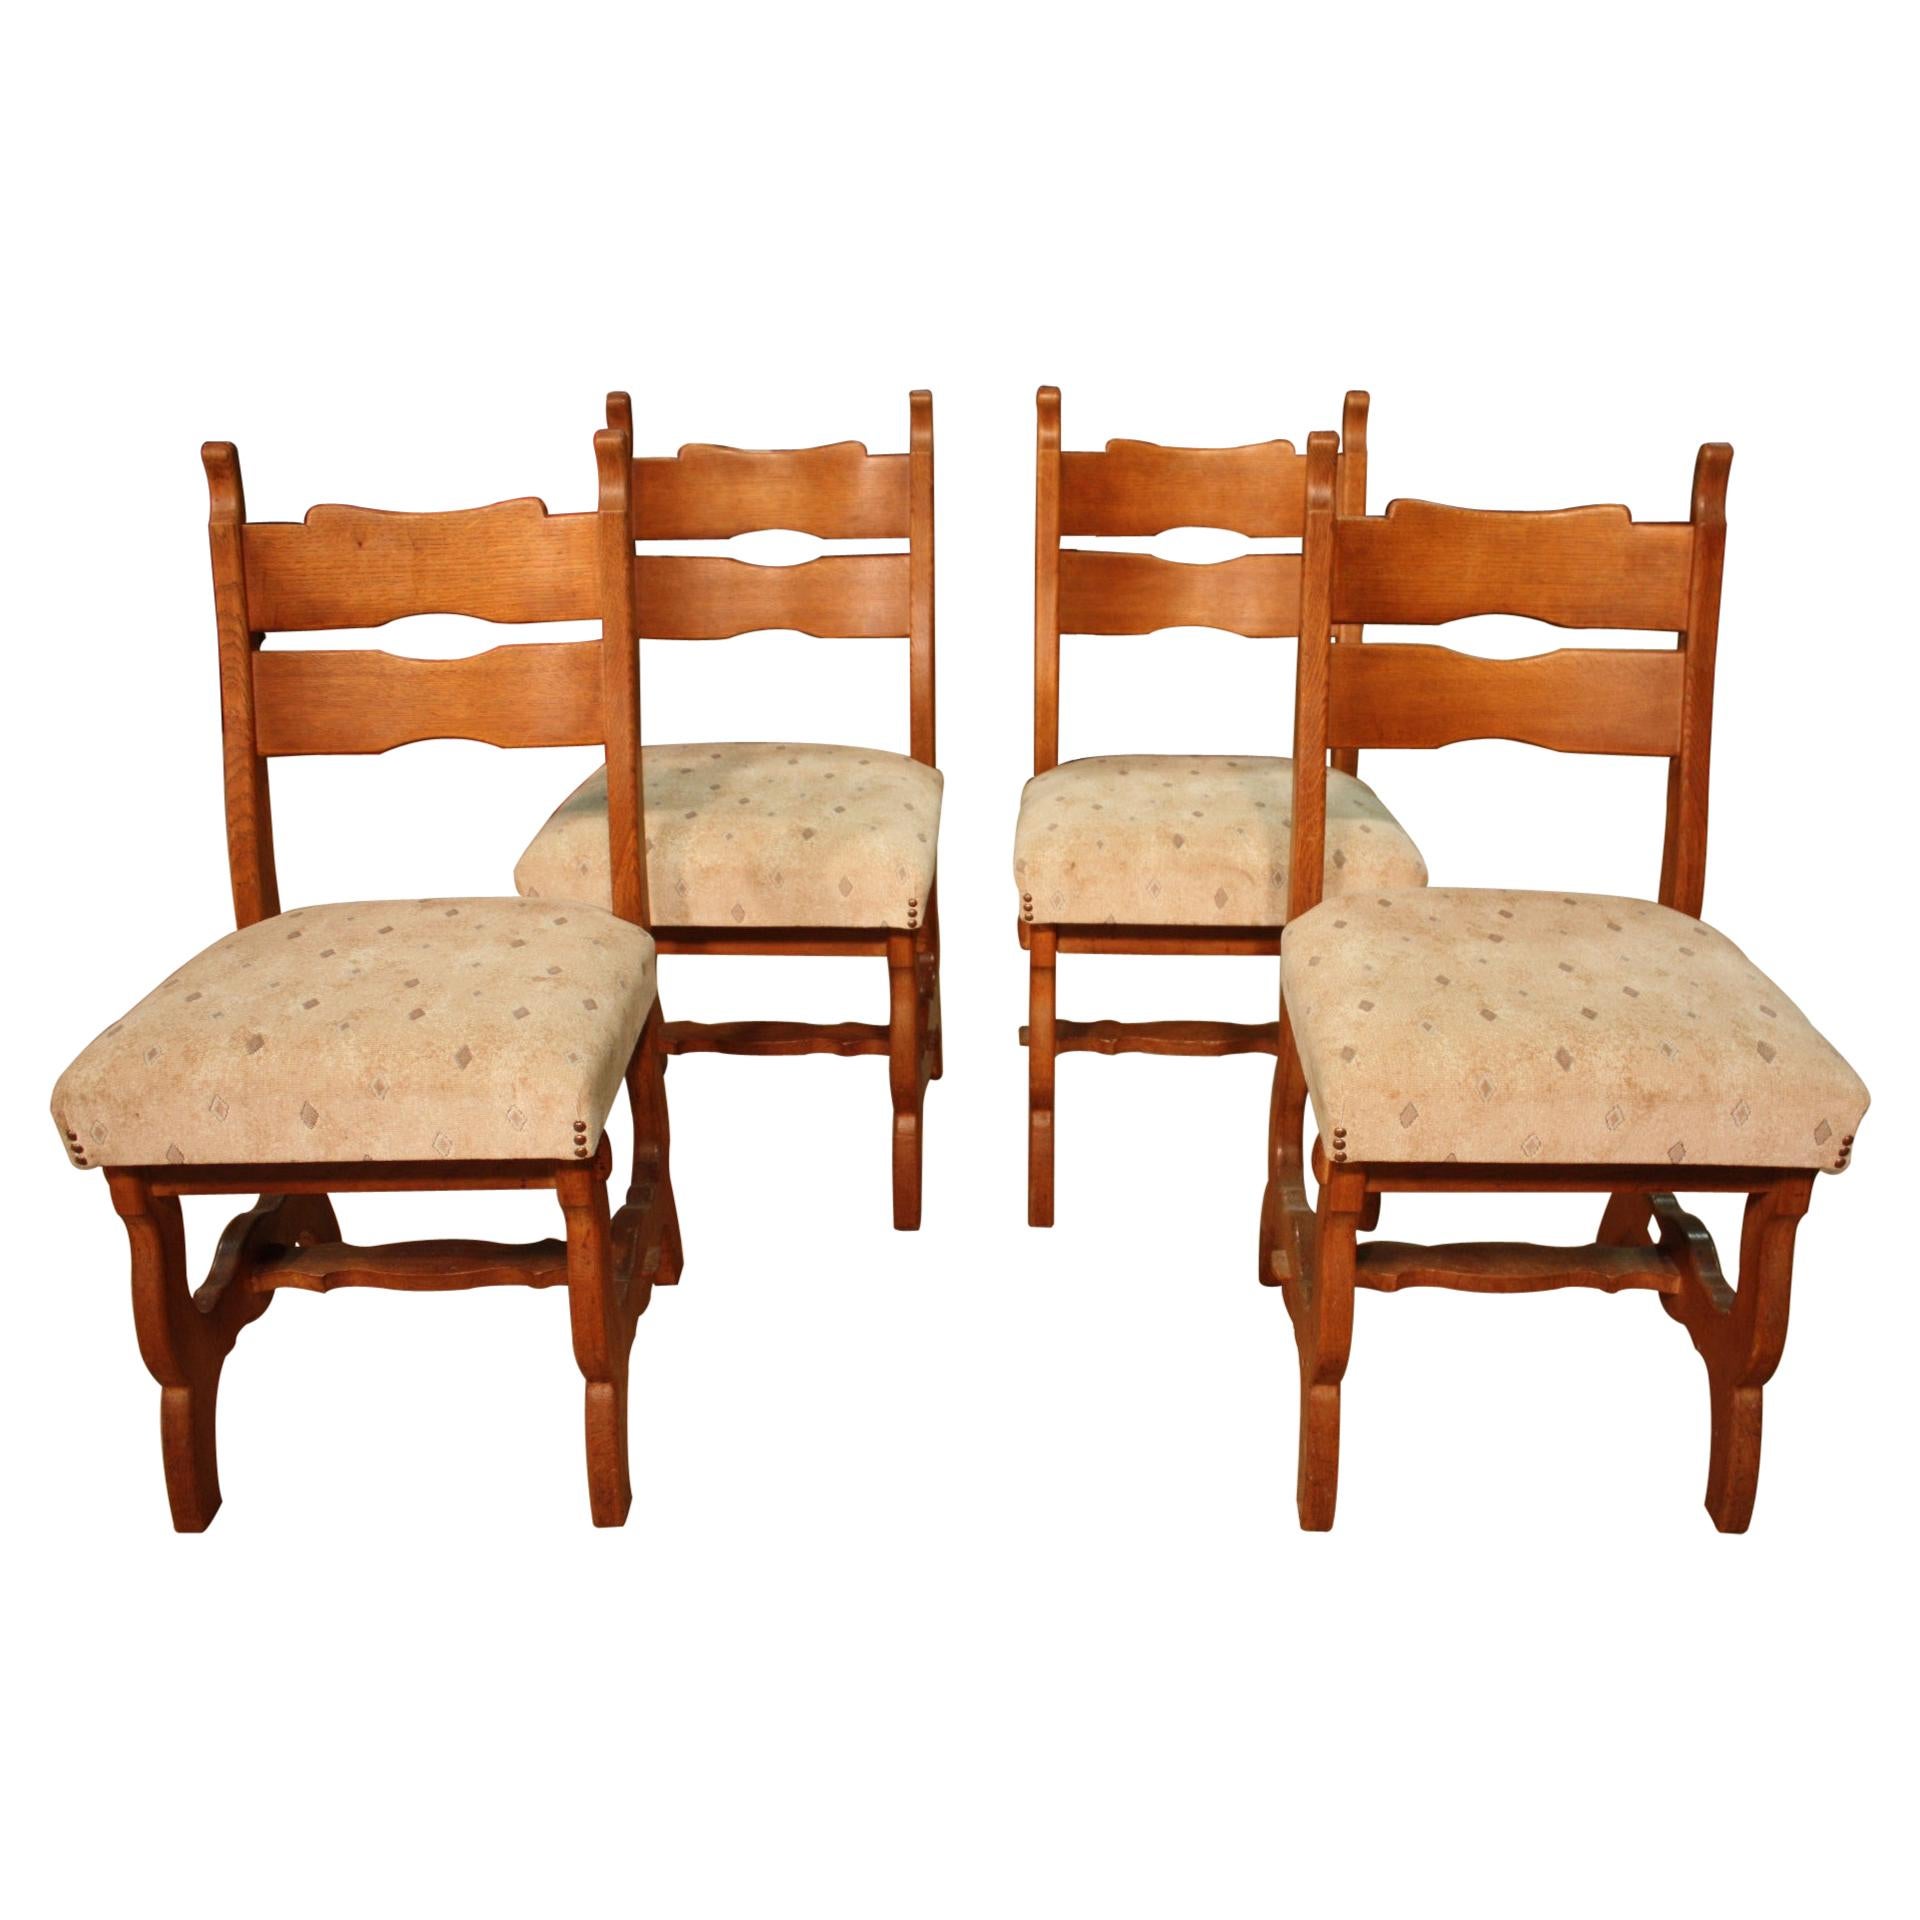 Group of 4 Rustic Northern European Chairs, 20th Century For Sale